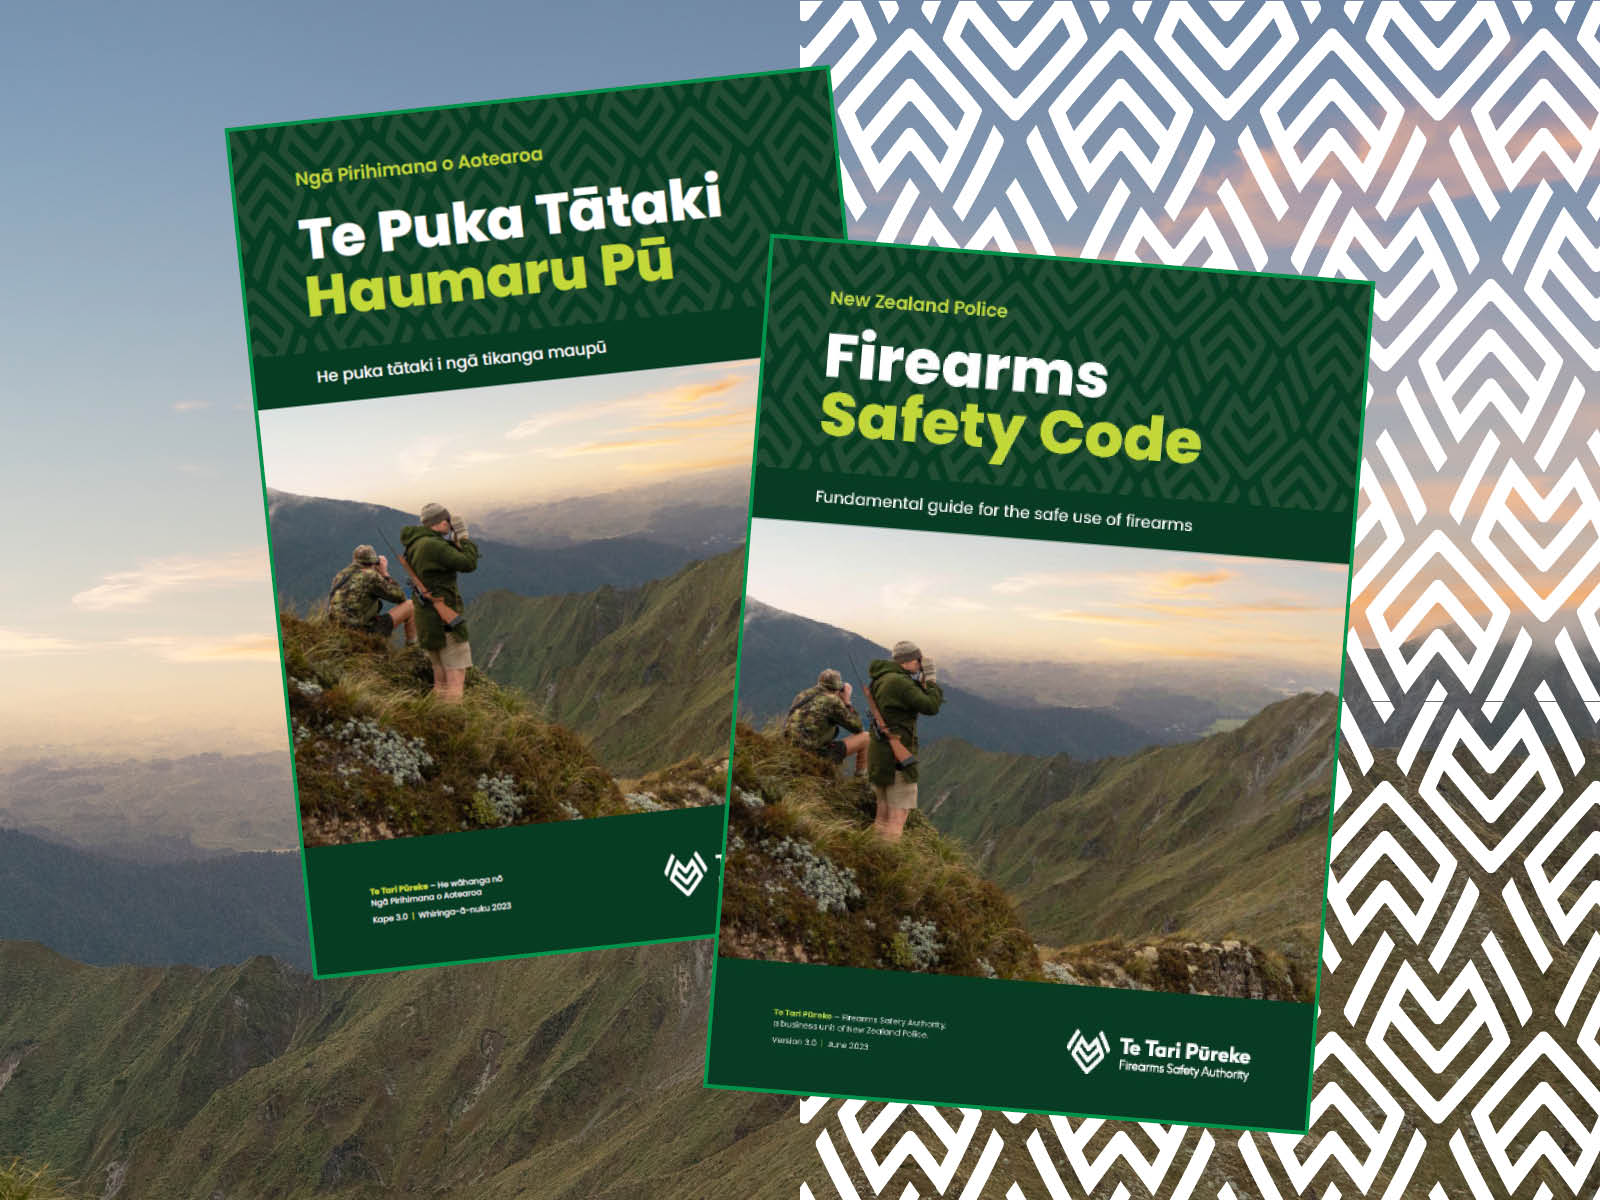 The two versions of the Firearms Safety Code in English and te reo Maori.